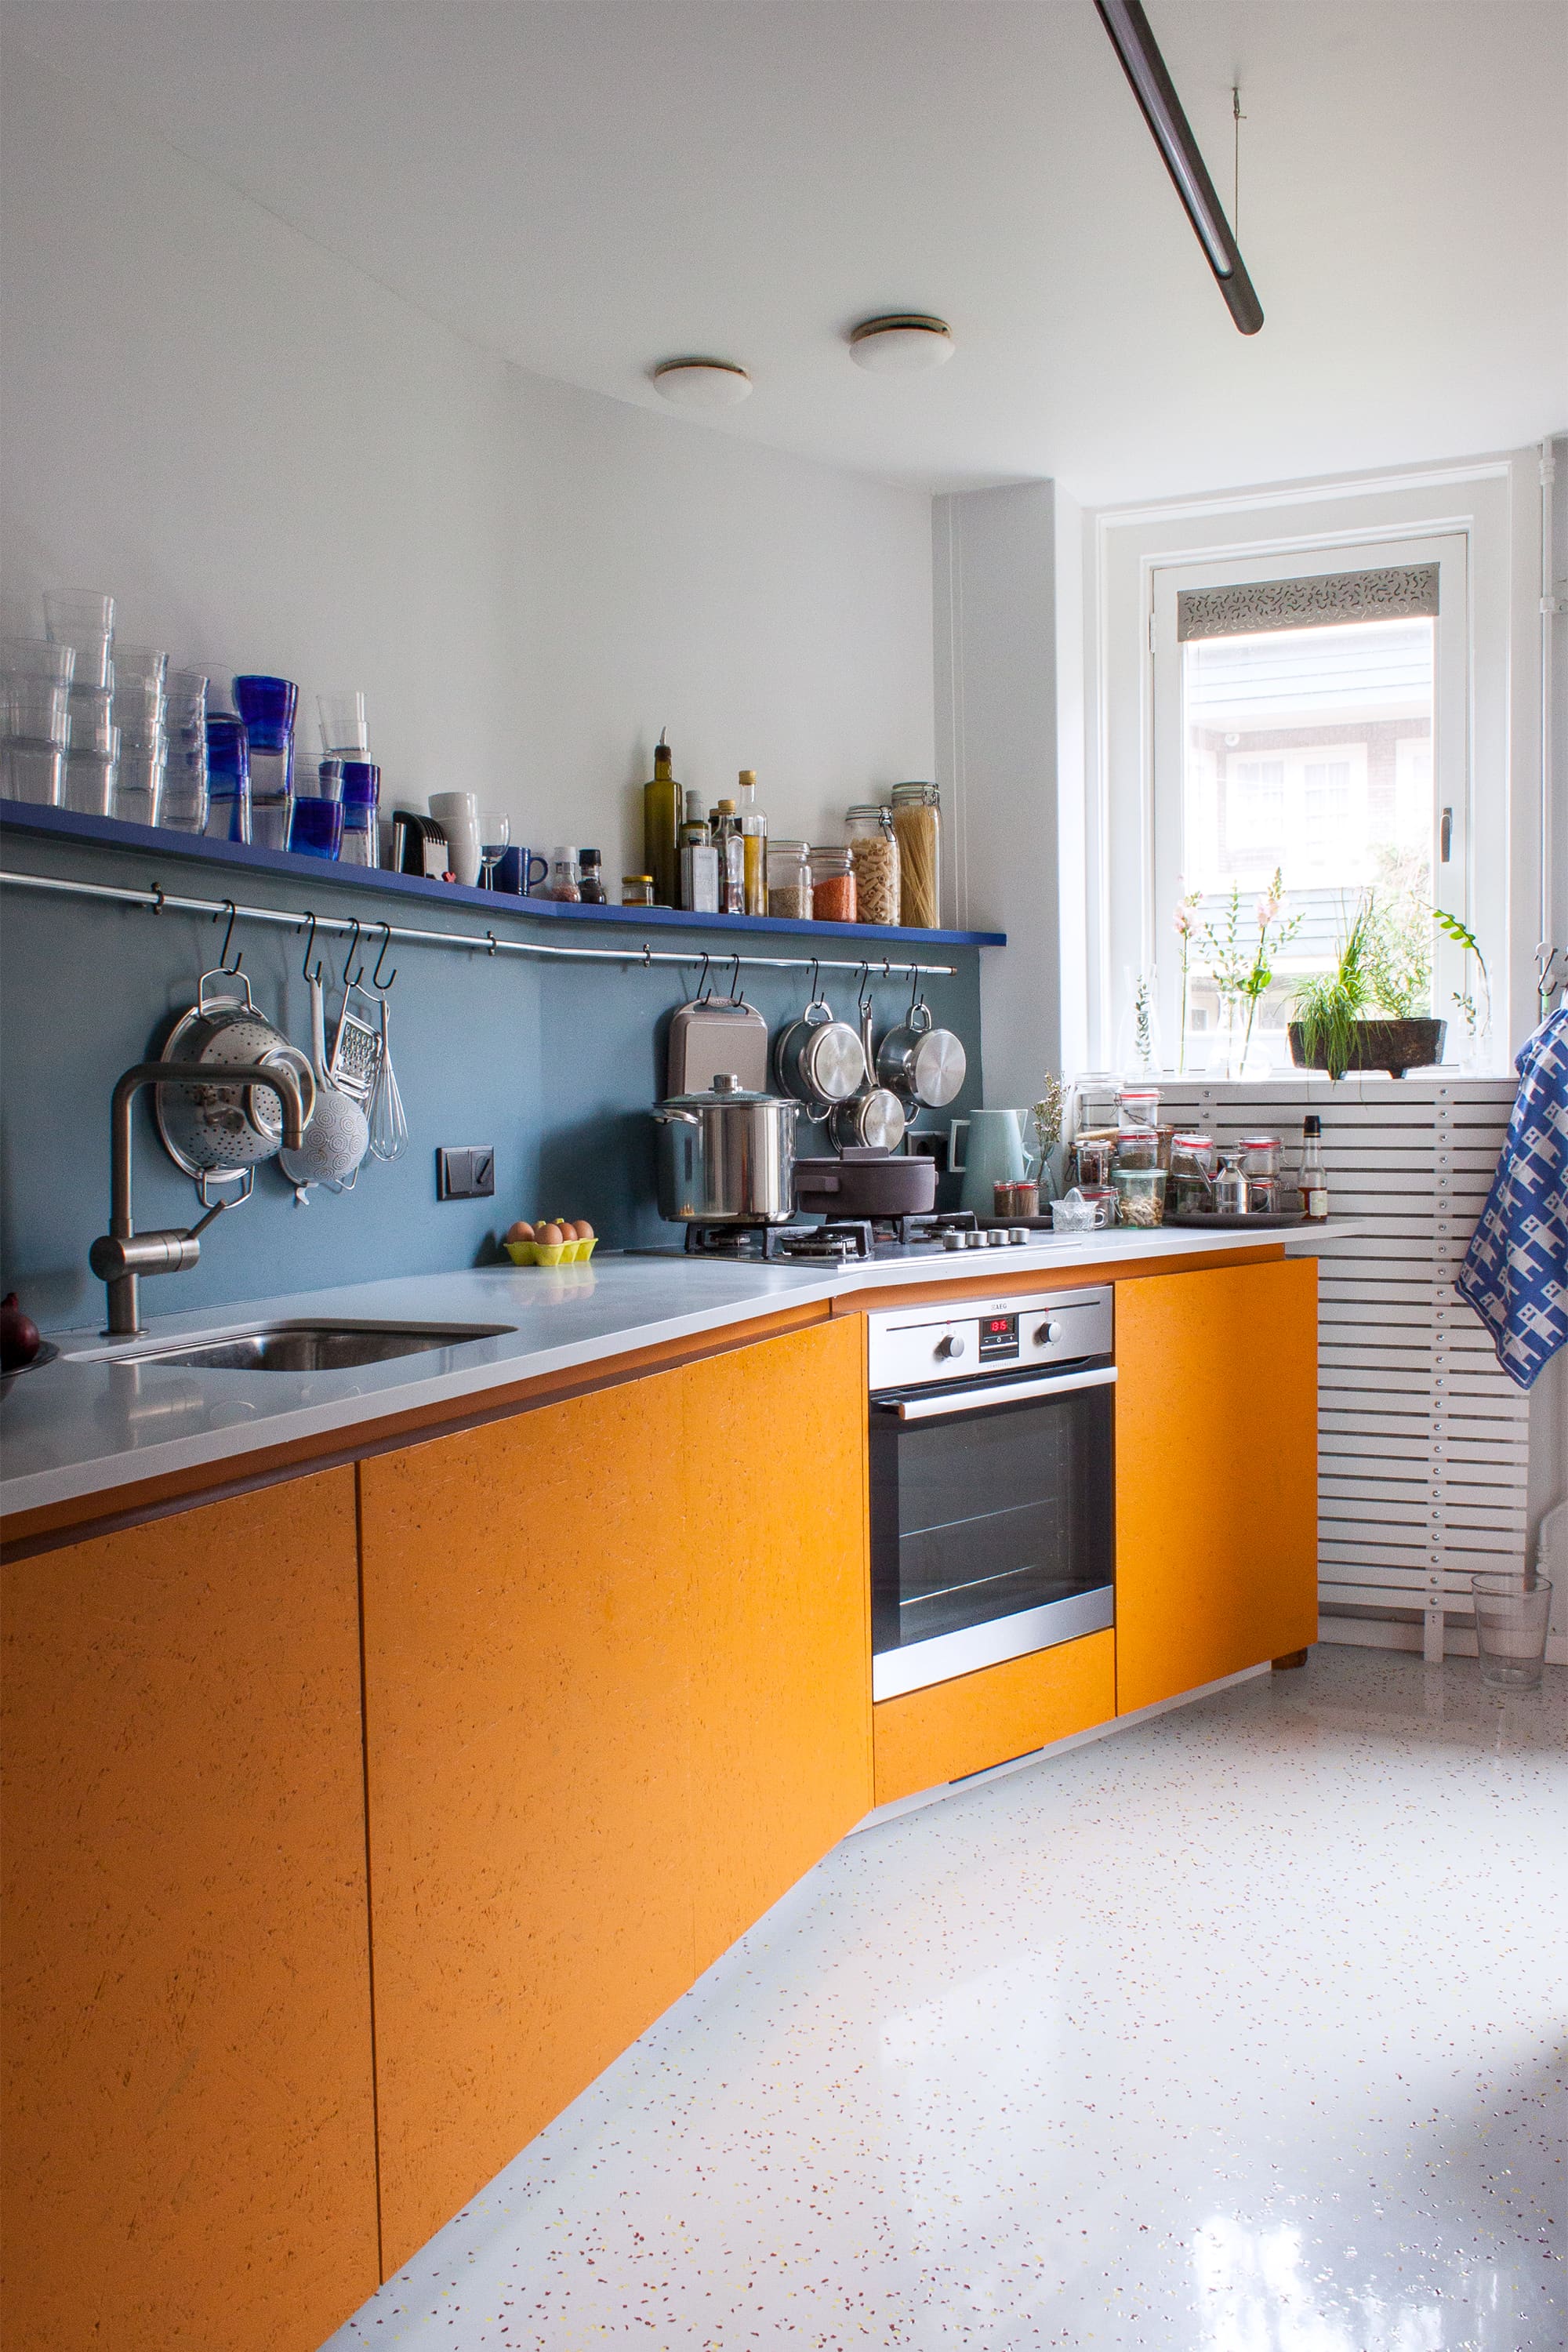 5 One-Wall Kitchen Tips to Make Yours Feel Roomier